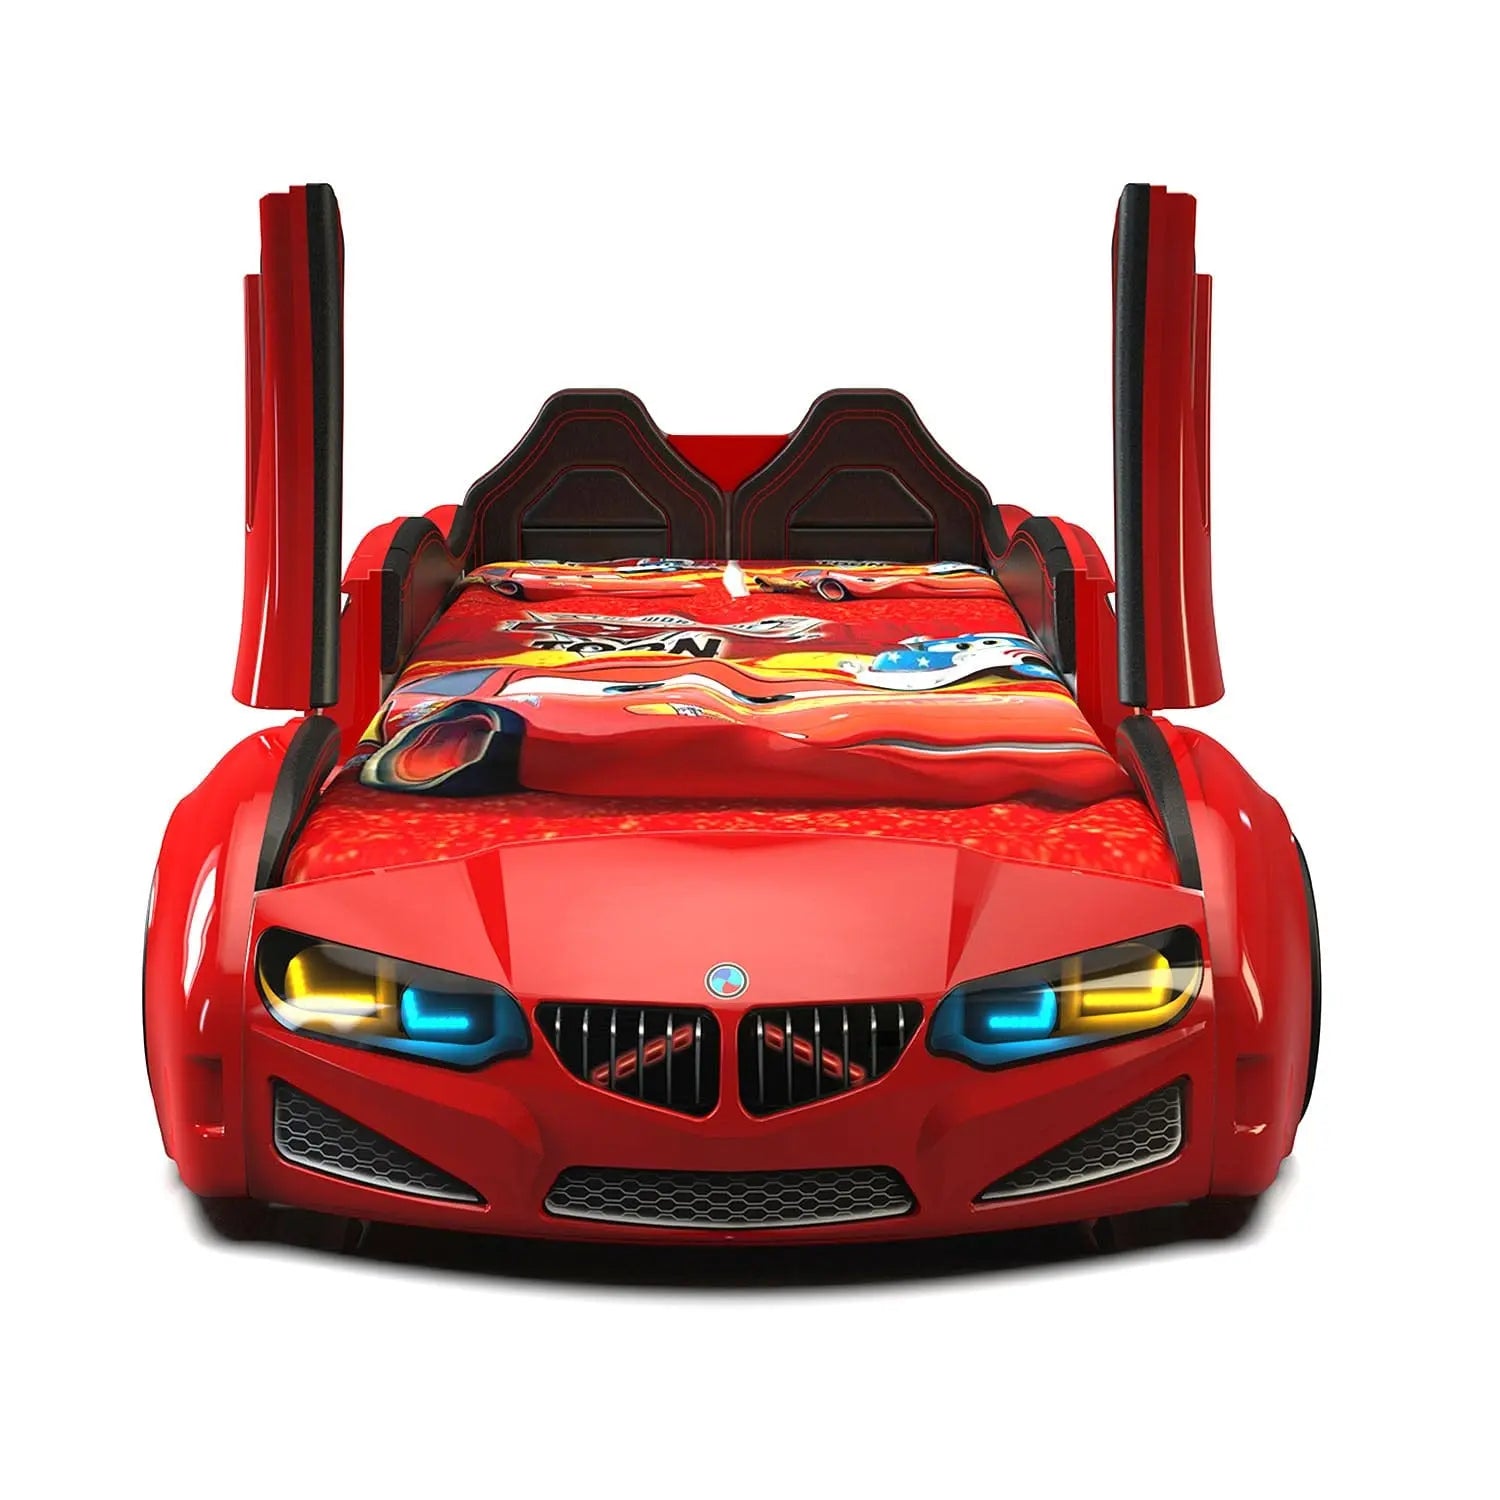 Beamer MZ Car Bed, Racing Headlights, Remote Control, Toddler Twin Size Frame